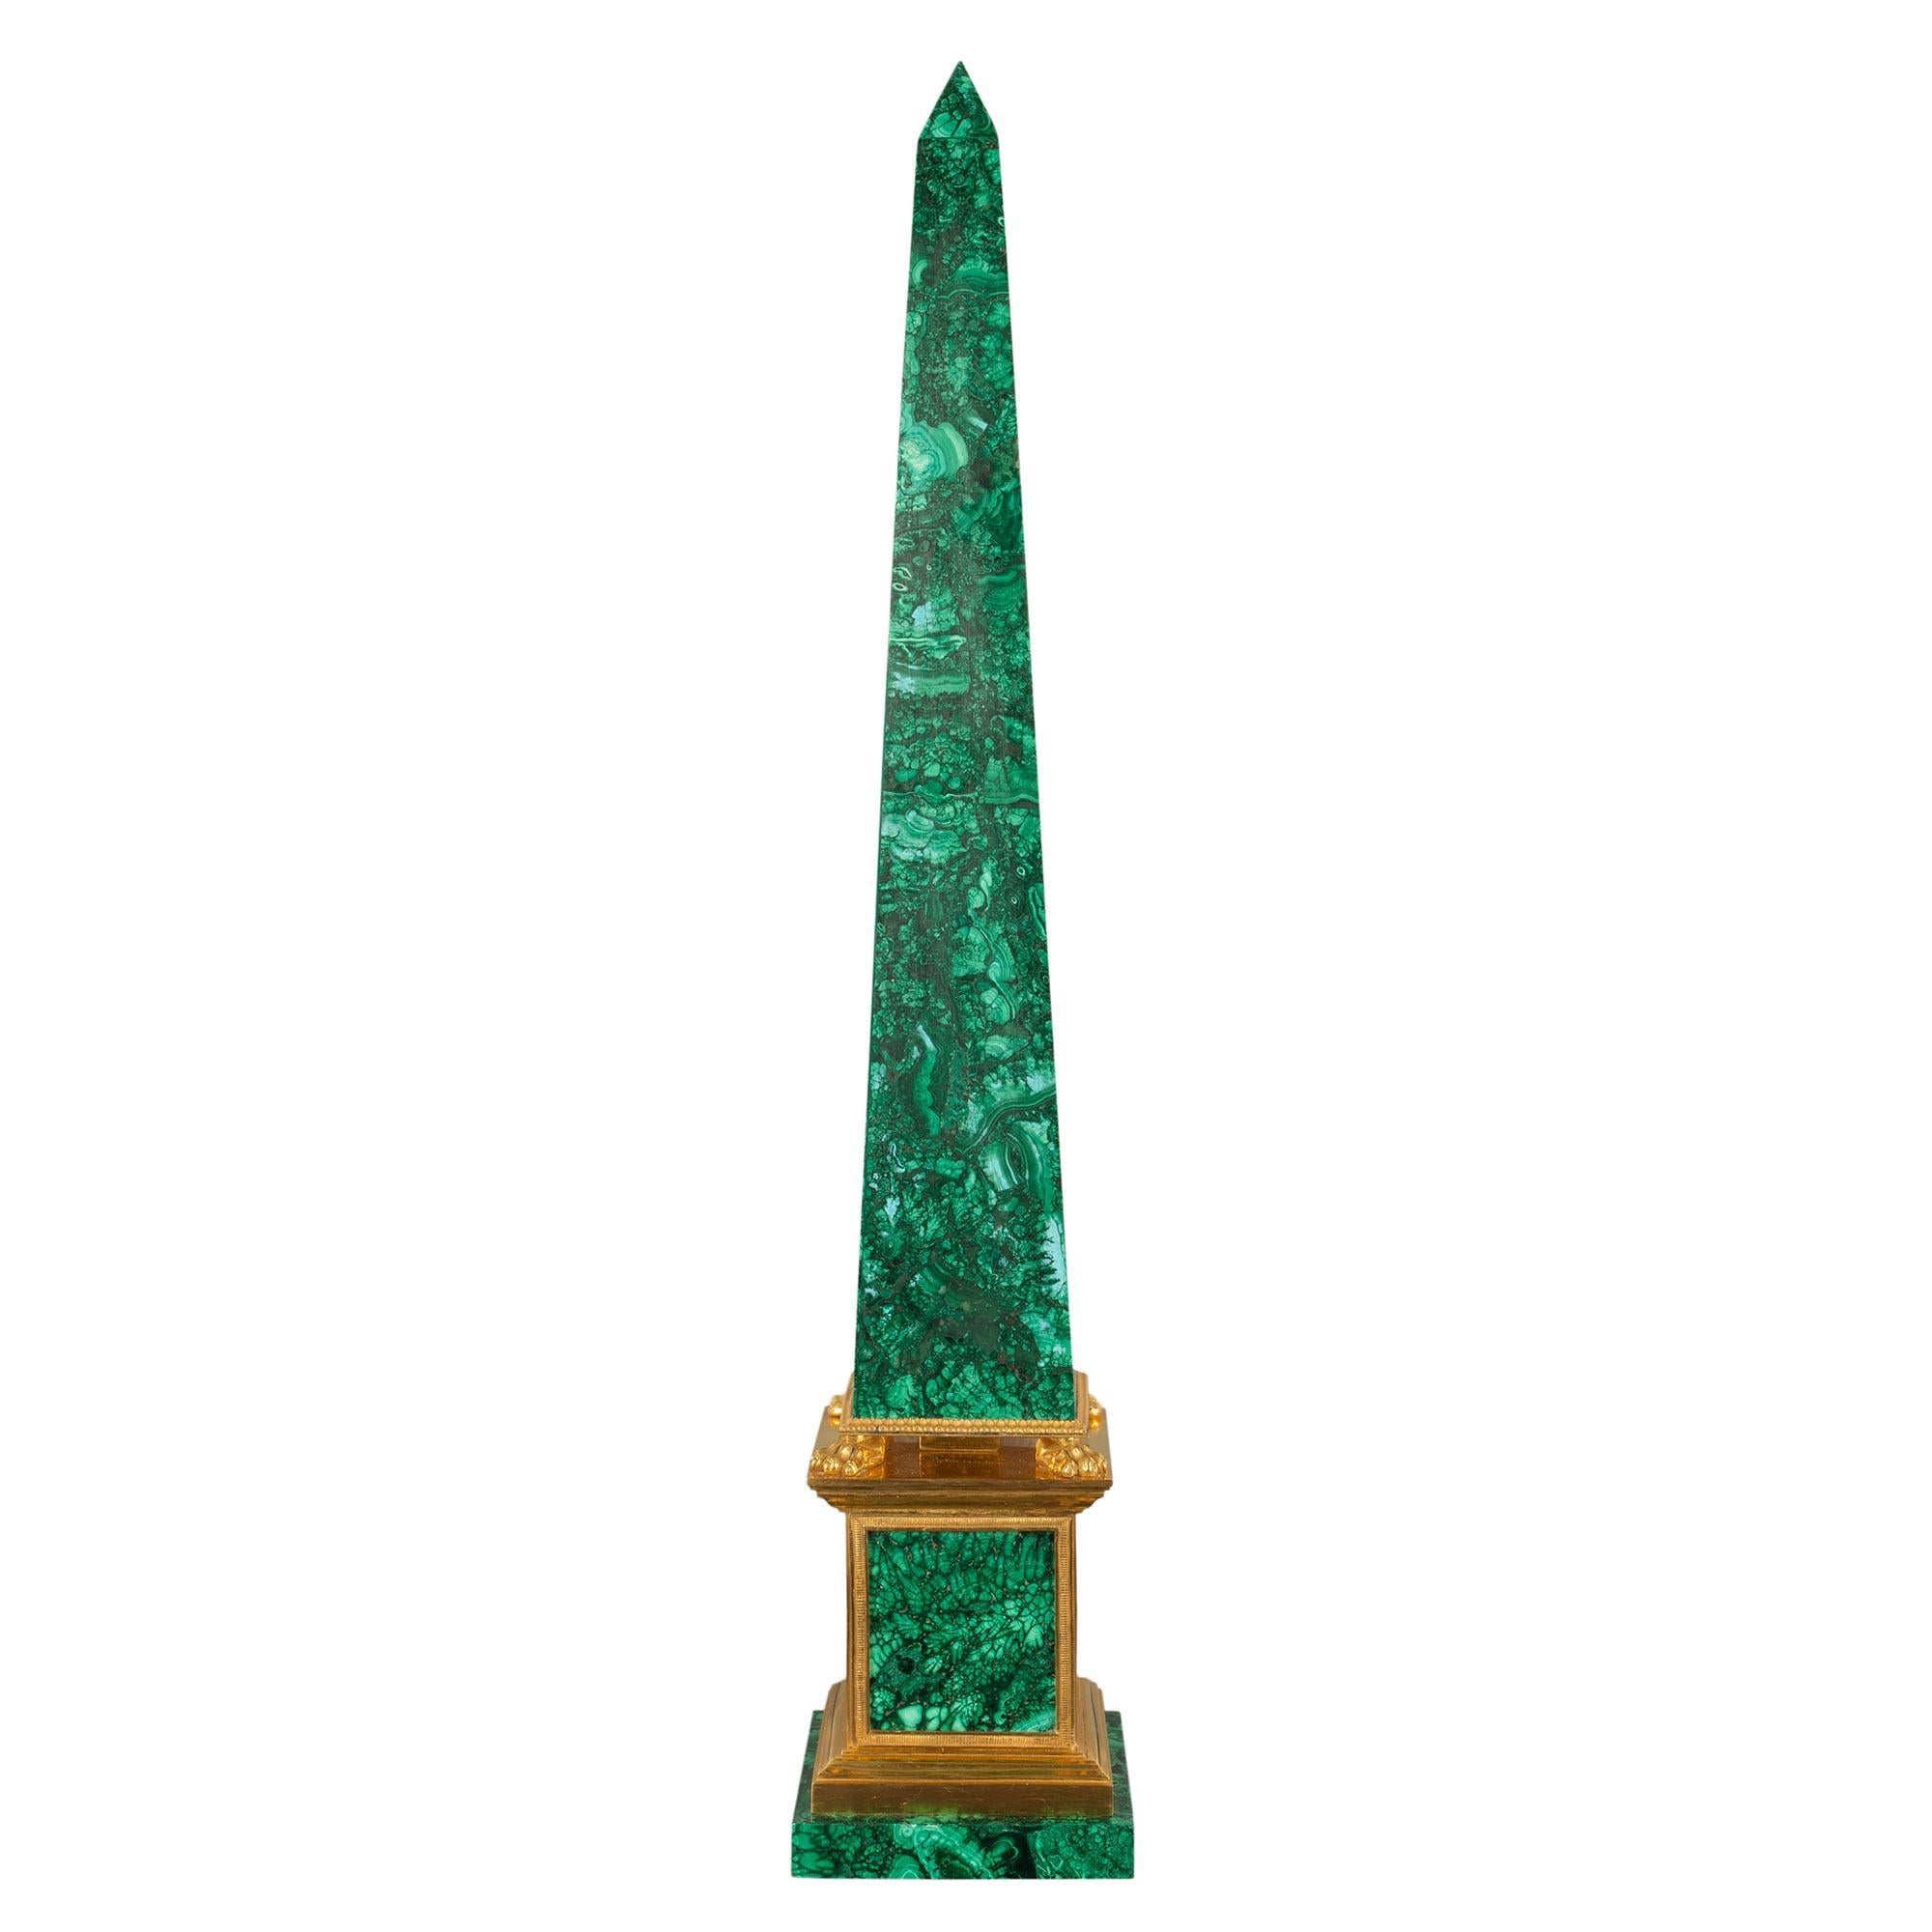 A most attractive and very high quality Italian 19th century Neo-Classical st. malachite and ormolu mounted obelisks. Each obelisk is raised by a square malachite base below the ormolu plinth with recessed malachite side panels. At the central